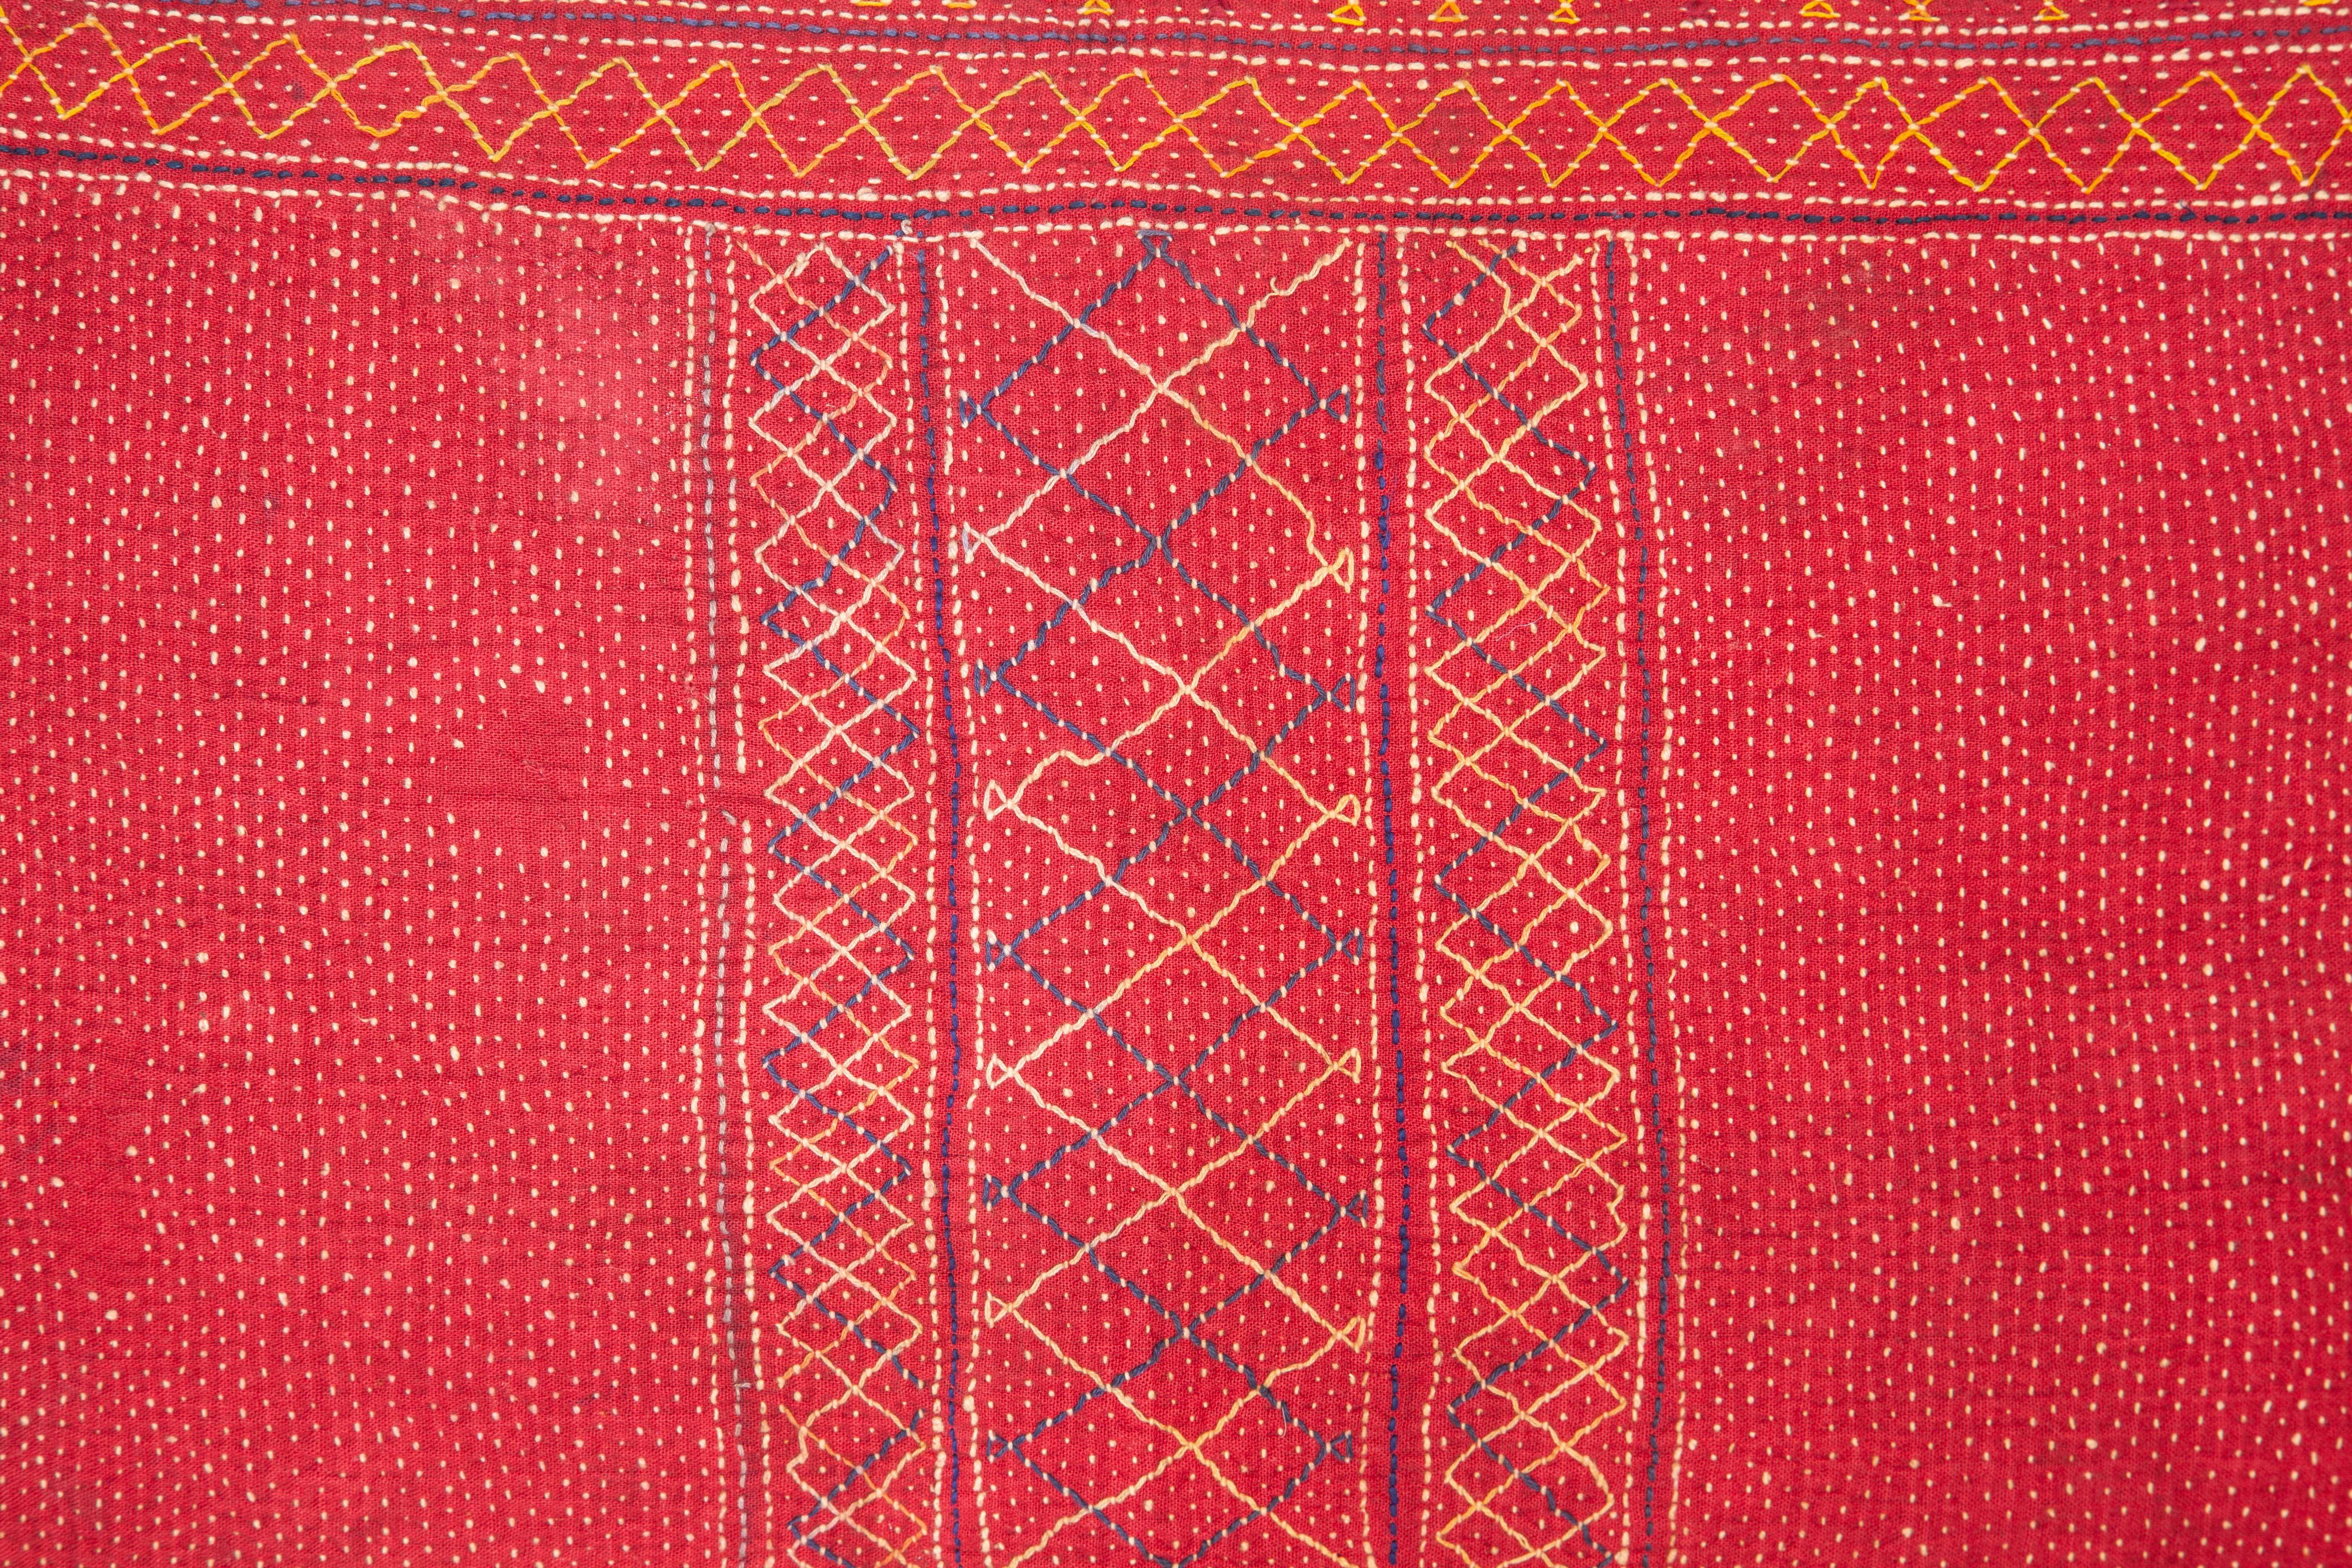 Tribal Old Banjara Quilt Cushion / Pillow Caseq, Early 20th Century For Sale